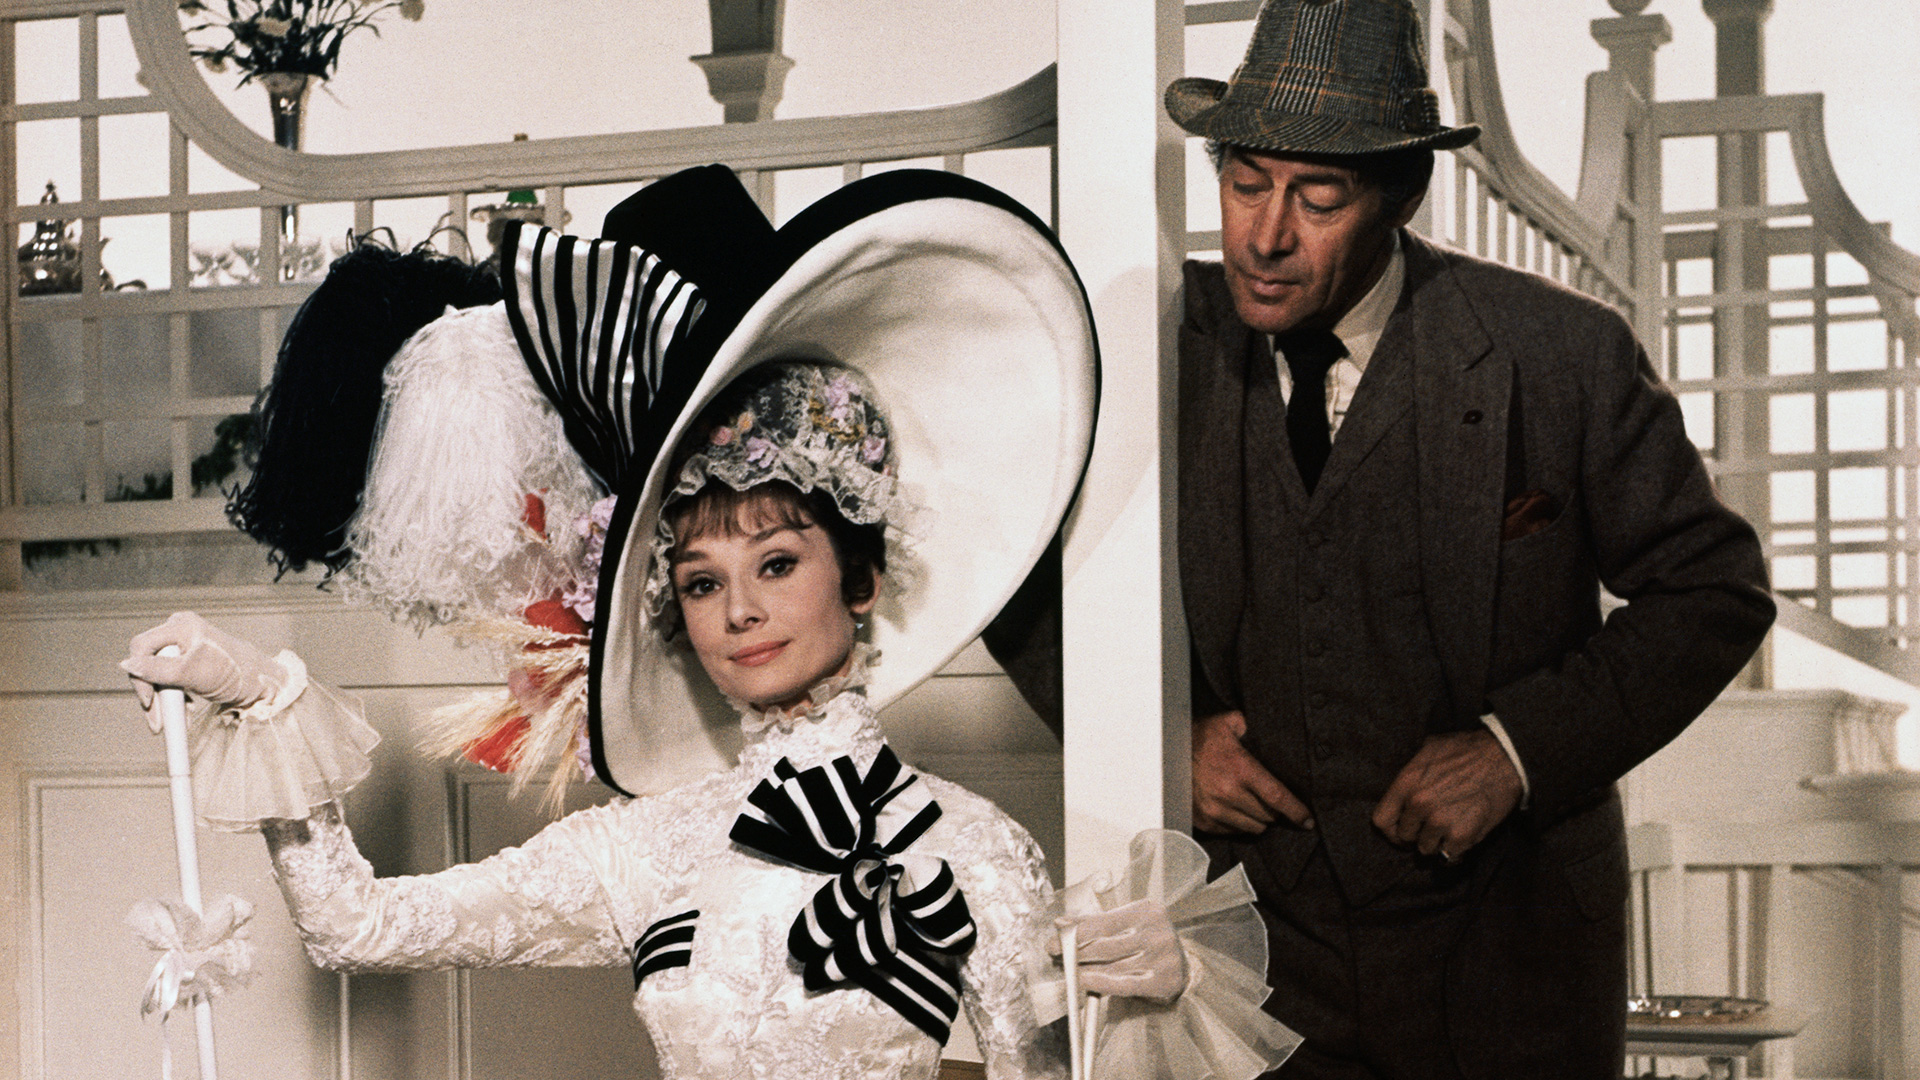 October 21, 1964: “My Fair Lady” Premiered in New York City